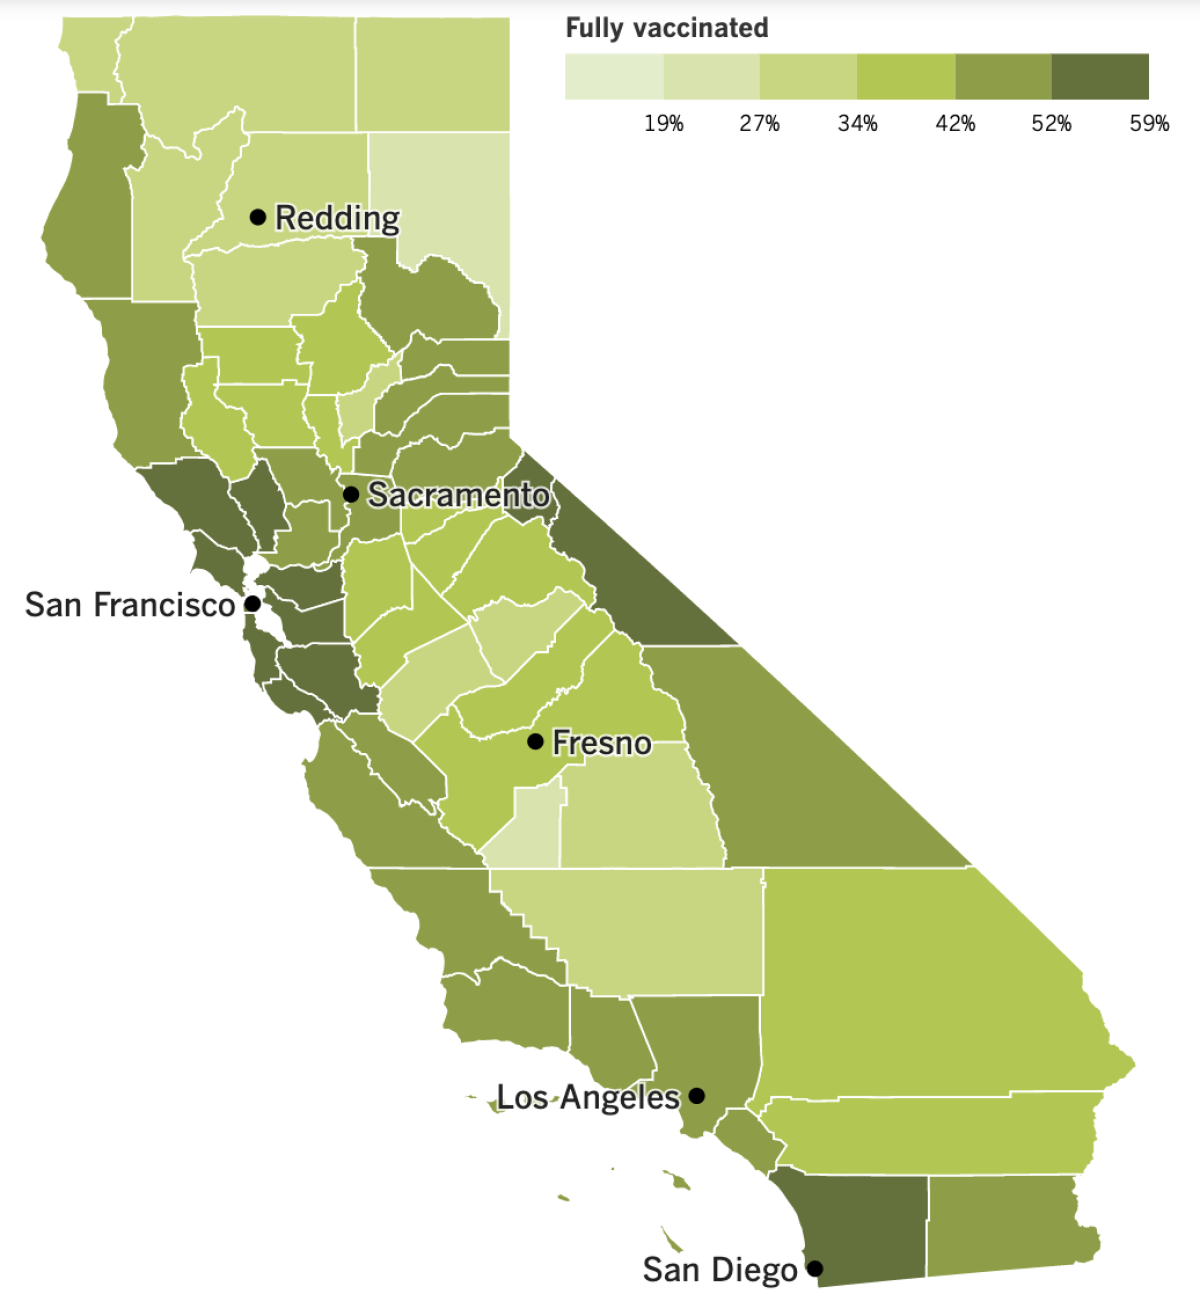 A map of California that shows the vaccination rates by county